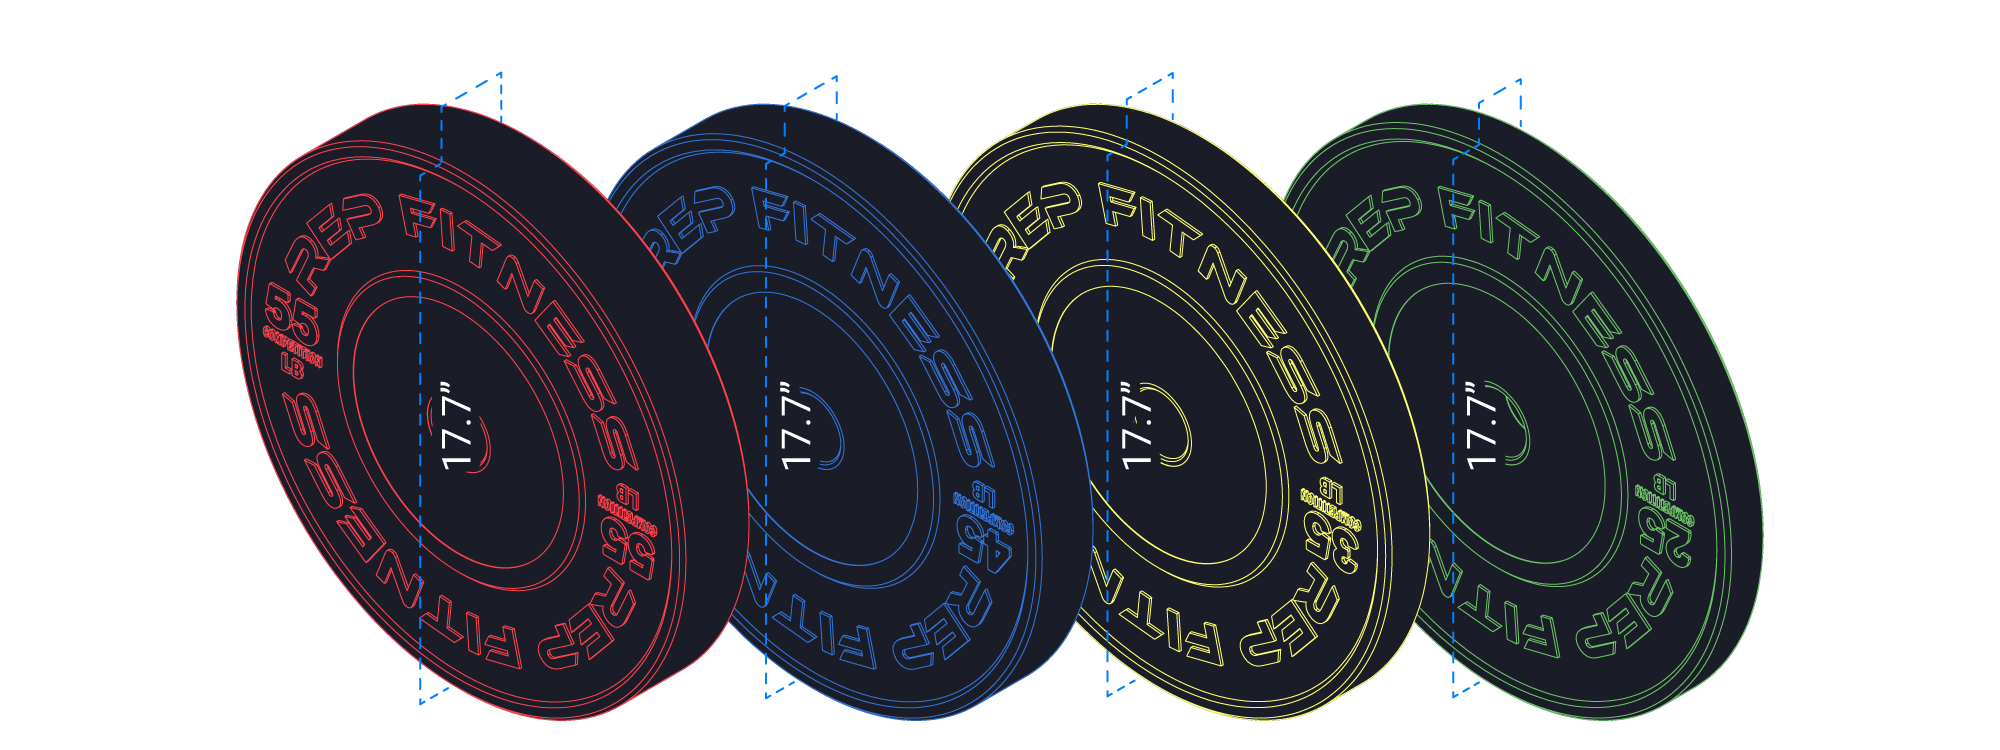 Competition Bumper Plates (LB) Informational